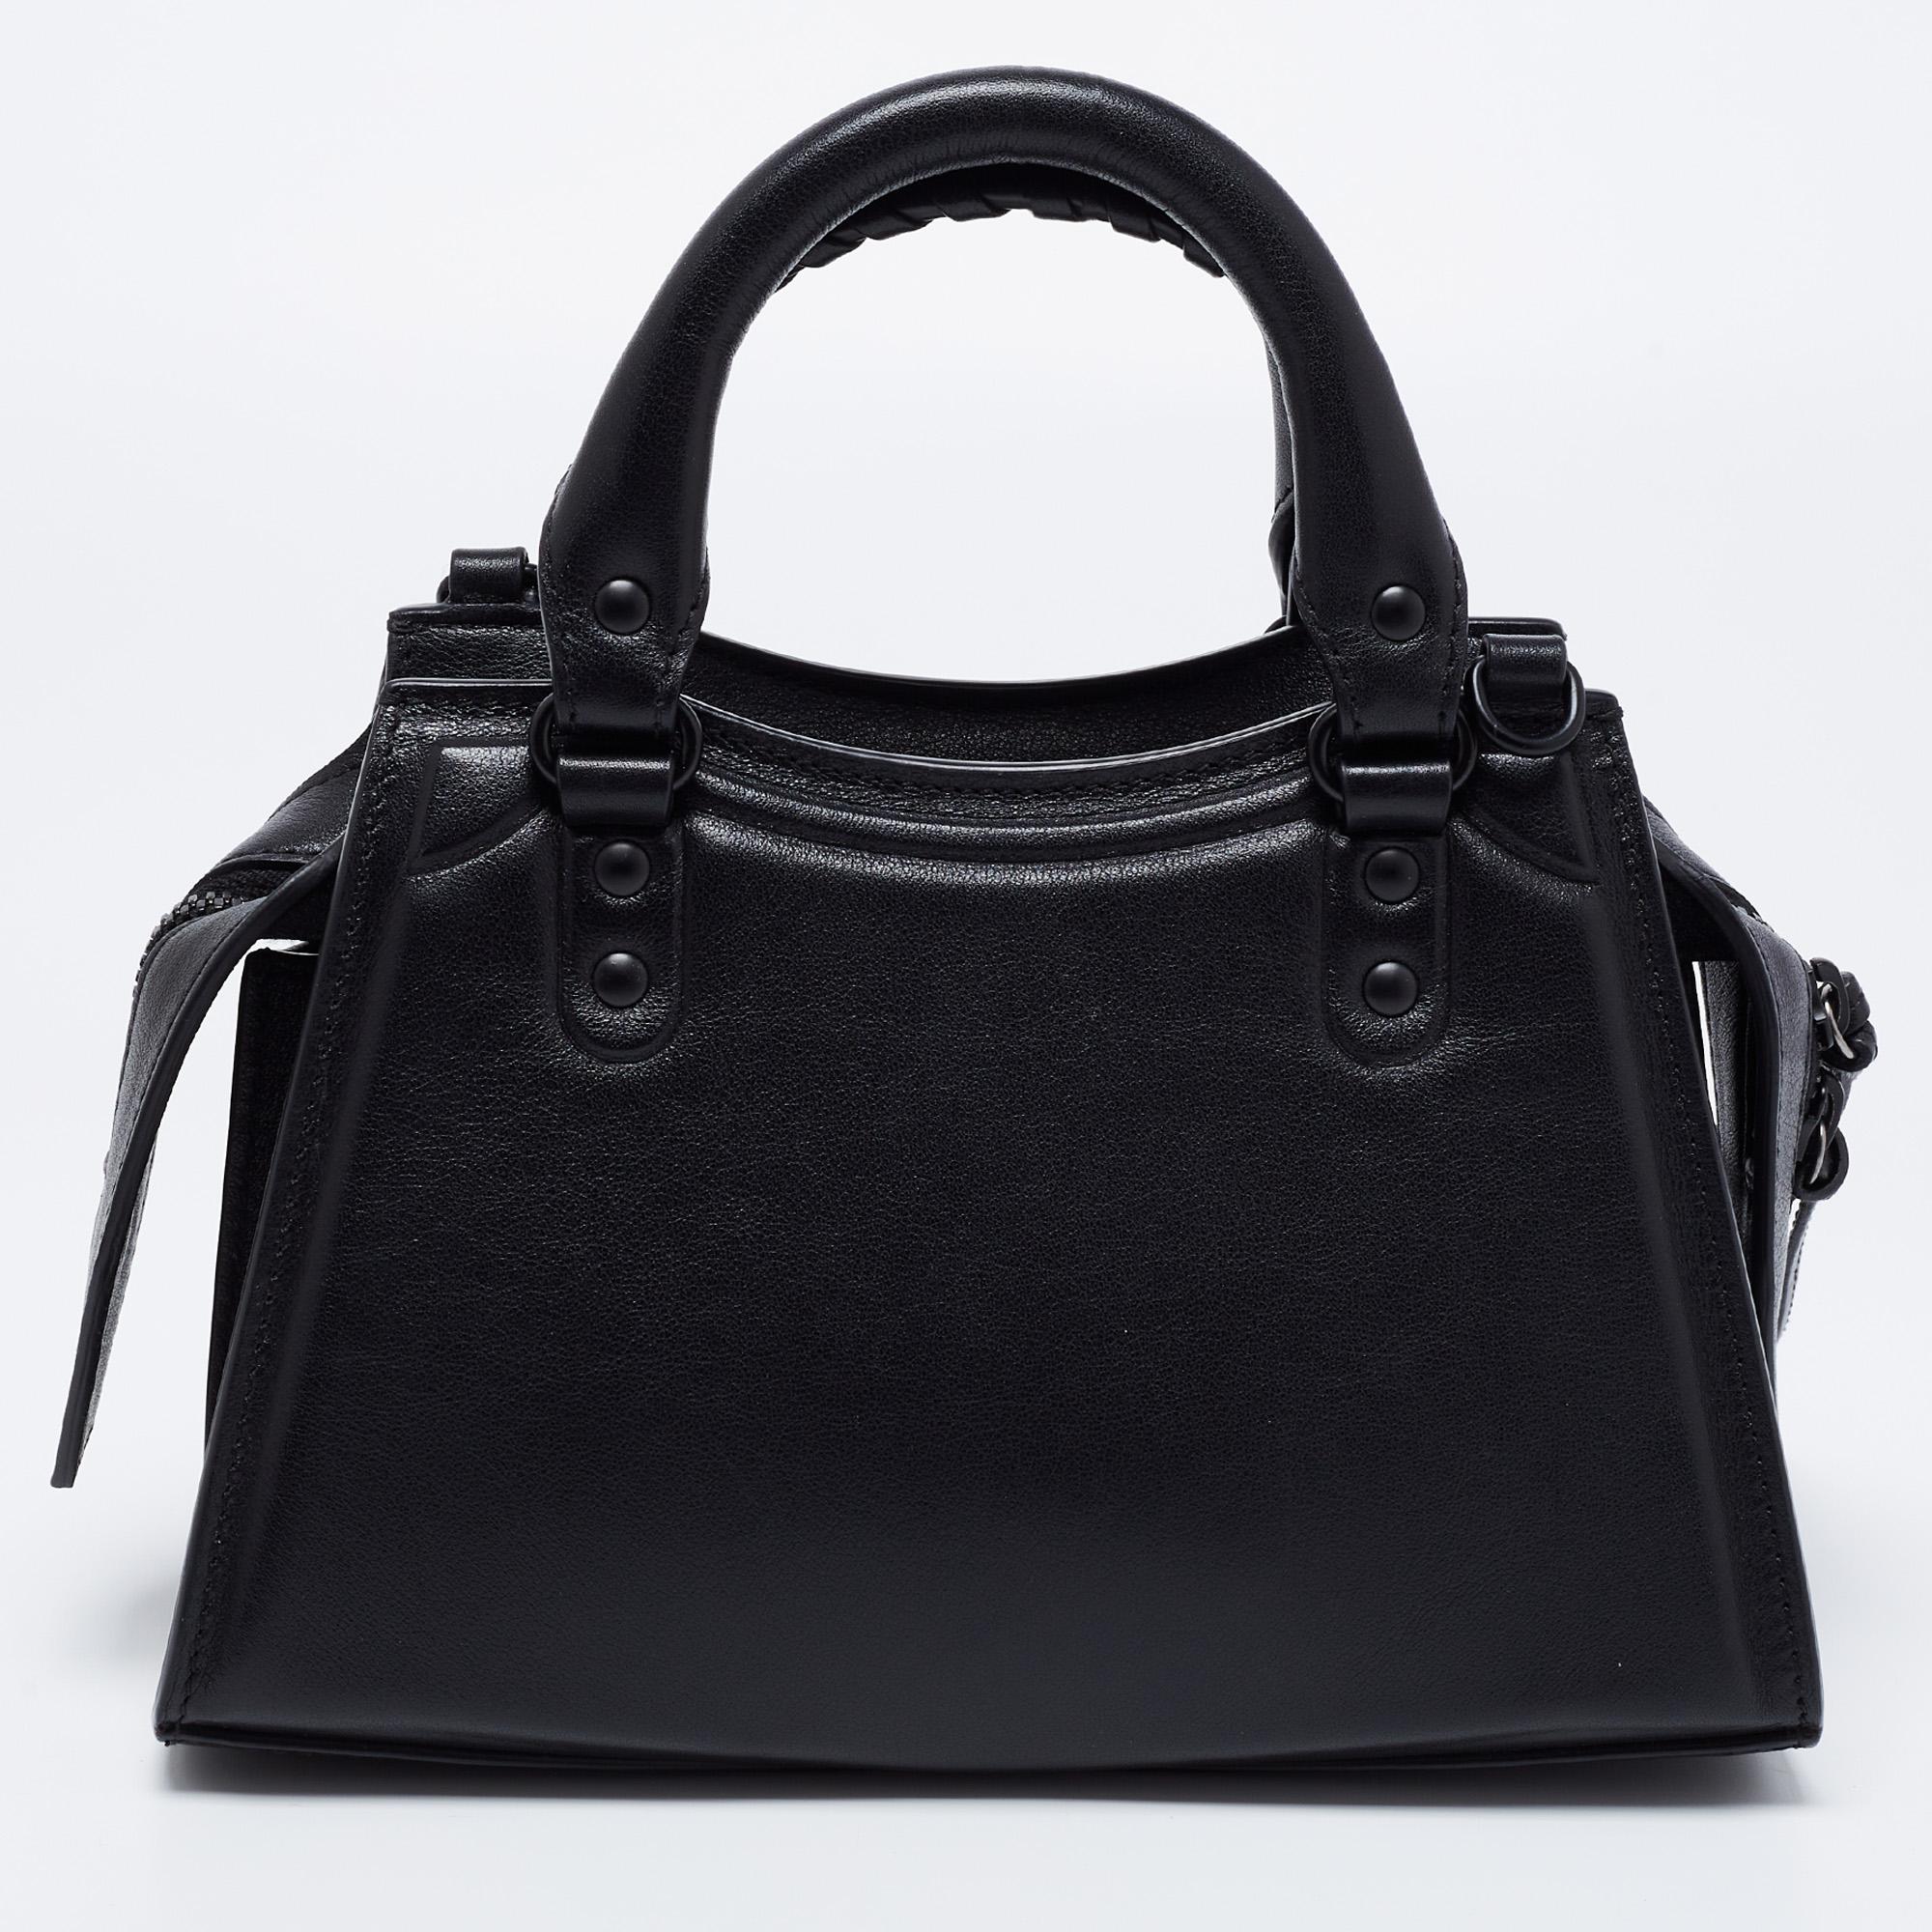 An absolute beauty, this mini tote is a Balenciaga creation. Crafted from black leather, the bag features fringe-like details, dual handles, matching black-tone hardware, and an interior sized perfectly to hold your essentials. This lovely tote is a